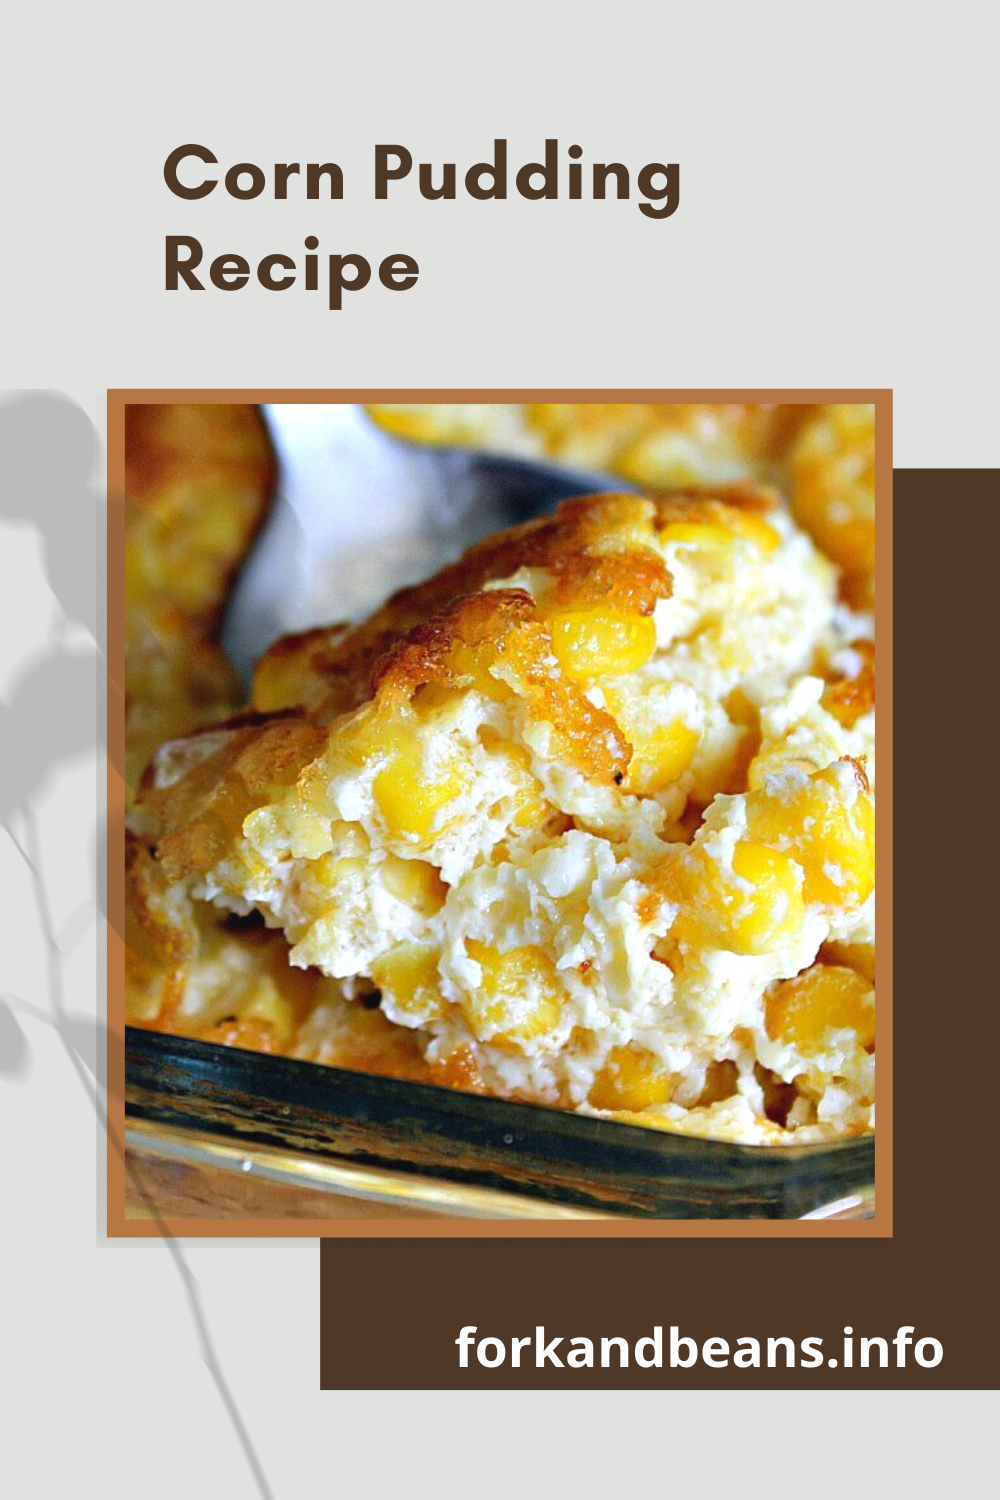 AUTHENTIC CORN PUDDING FOR THE WHOLE YEAR